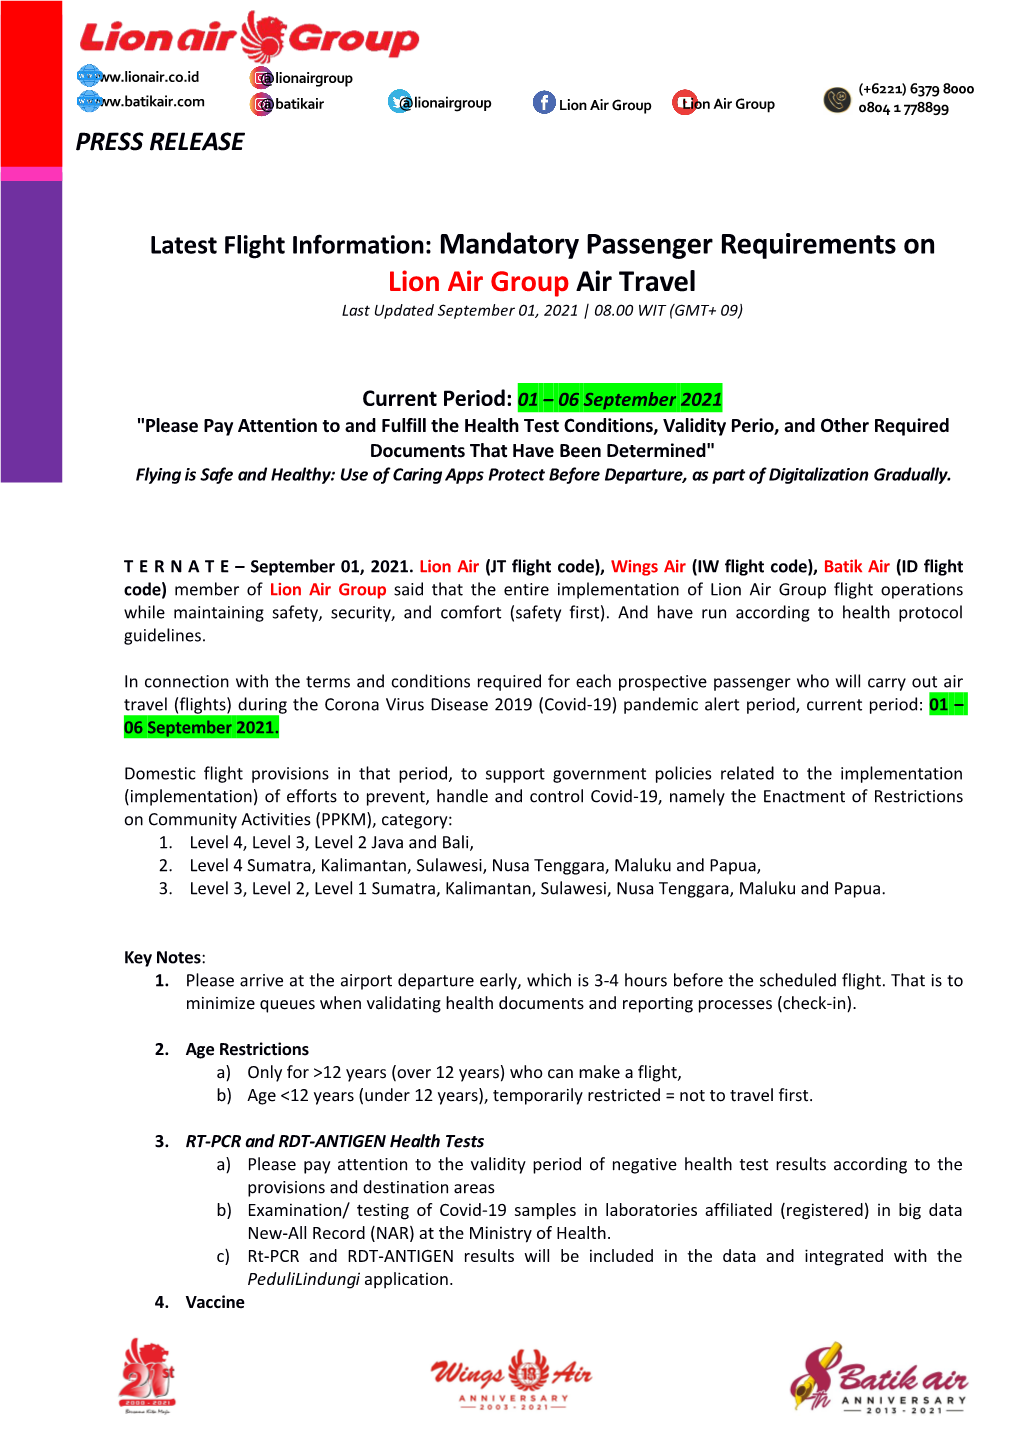 Mandatory Passenger Requirements on Lion Air Group Air Travel Last Updated September 01, 2021 | 08.00 WIT (GMT+ 09)